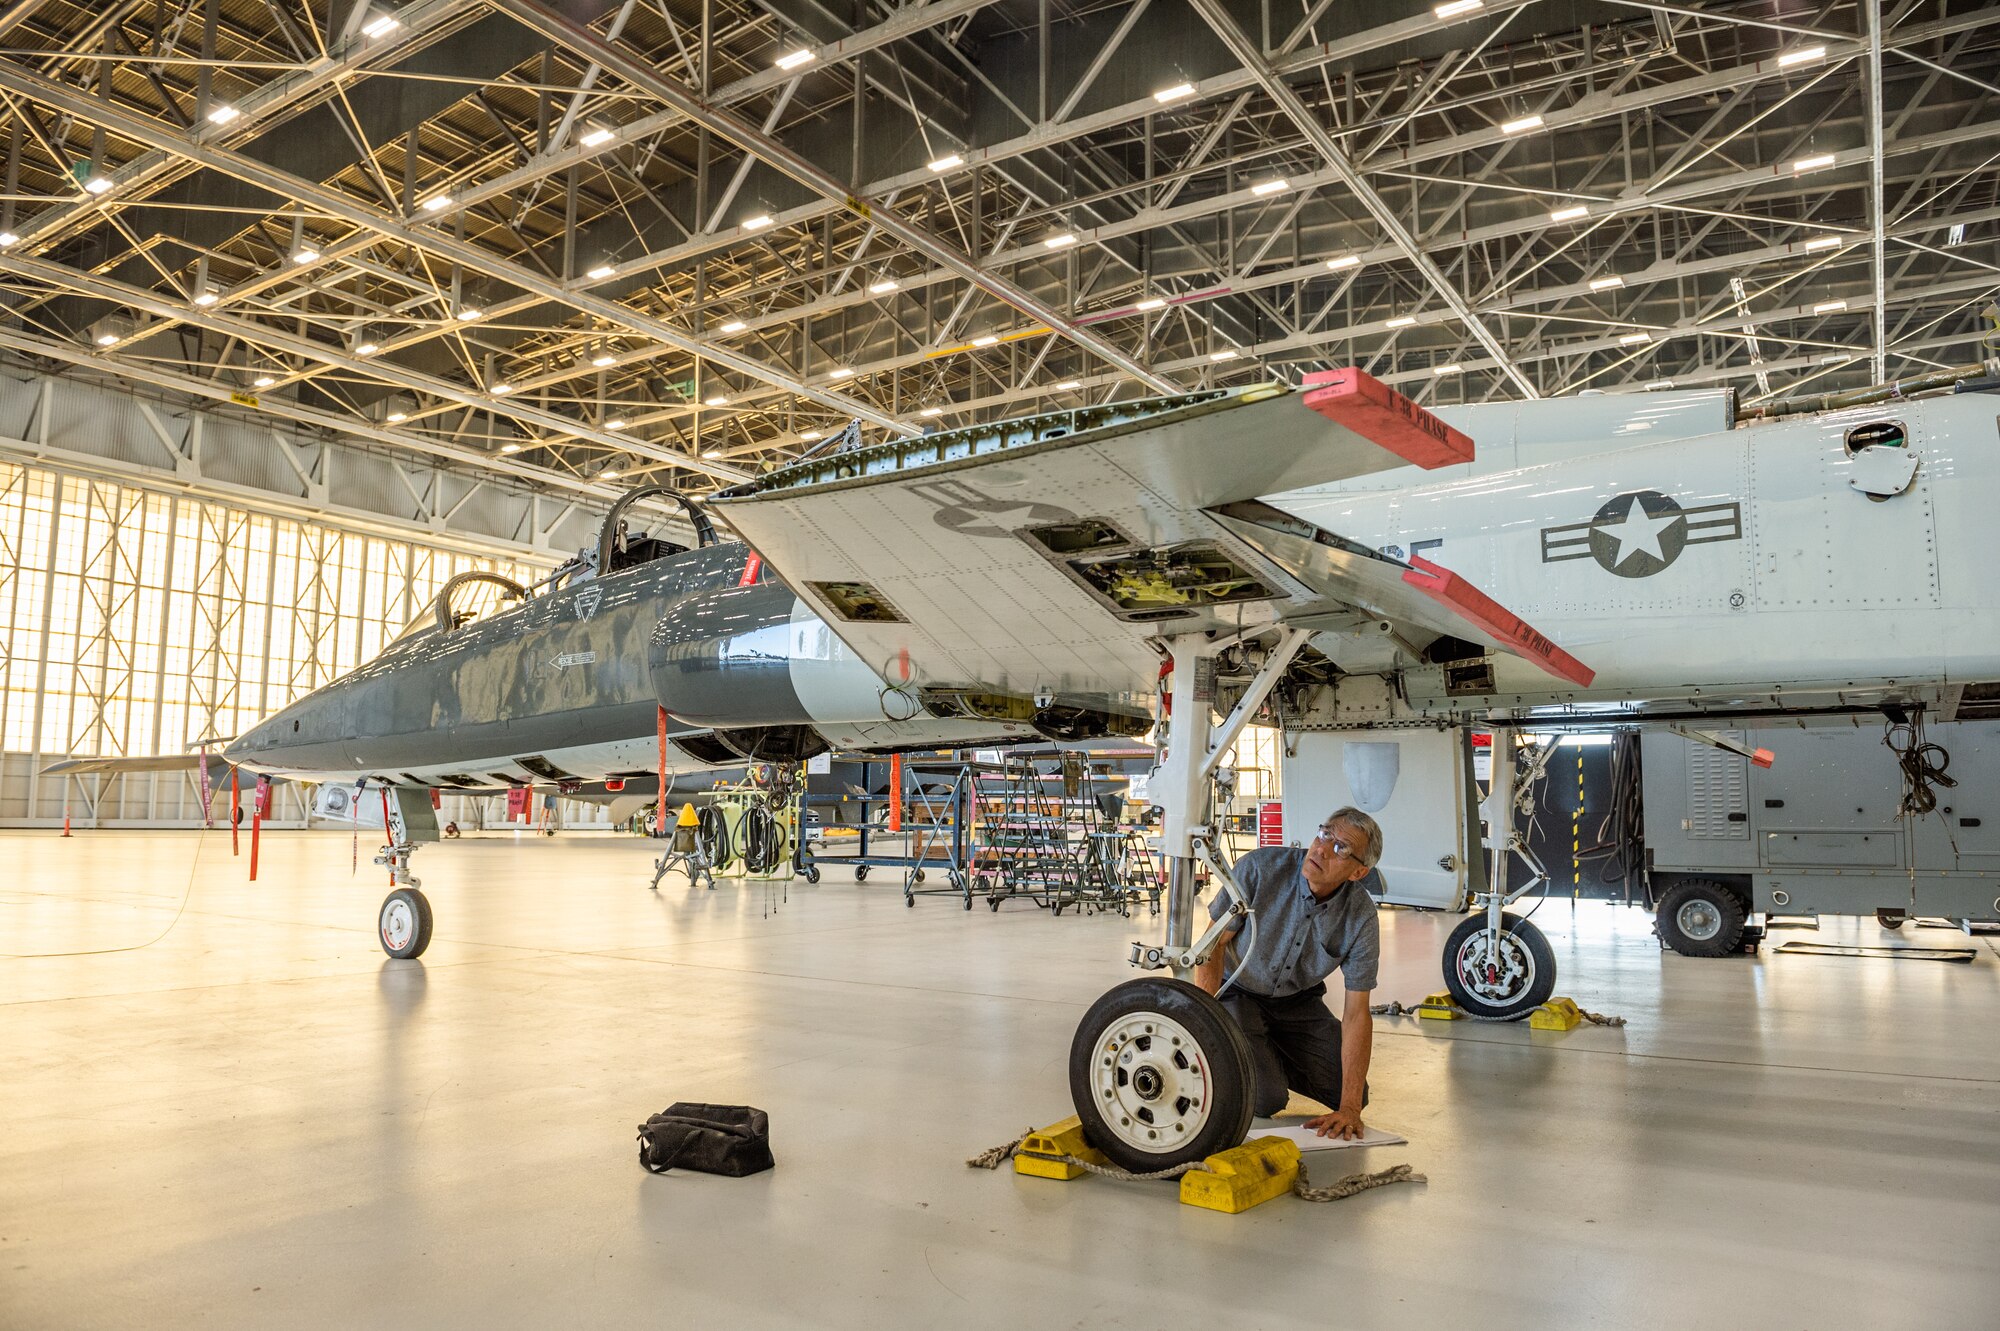 Rick Choate, Exosonic, Inc. chief engineer, obtains measurements from a T-38 Talon II aircraft at Edwards Air Force Base, California, Aug. 29. The measurements will aid Exosonic in the development a next generation aerial target for the Air Force.